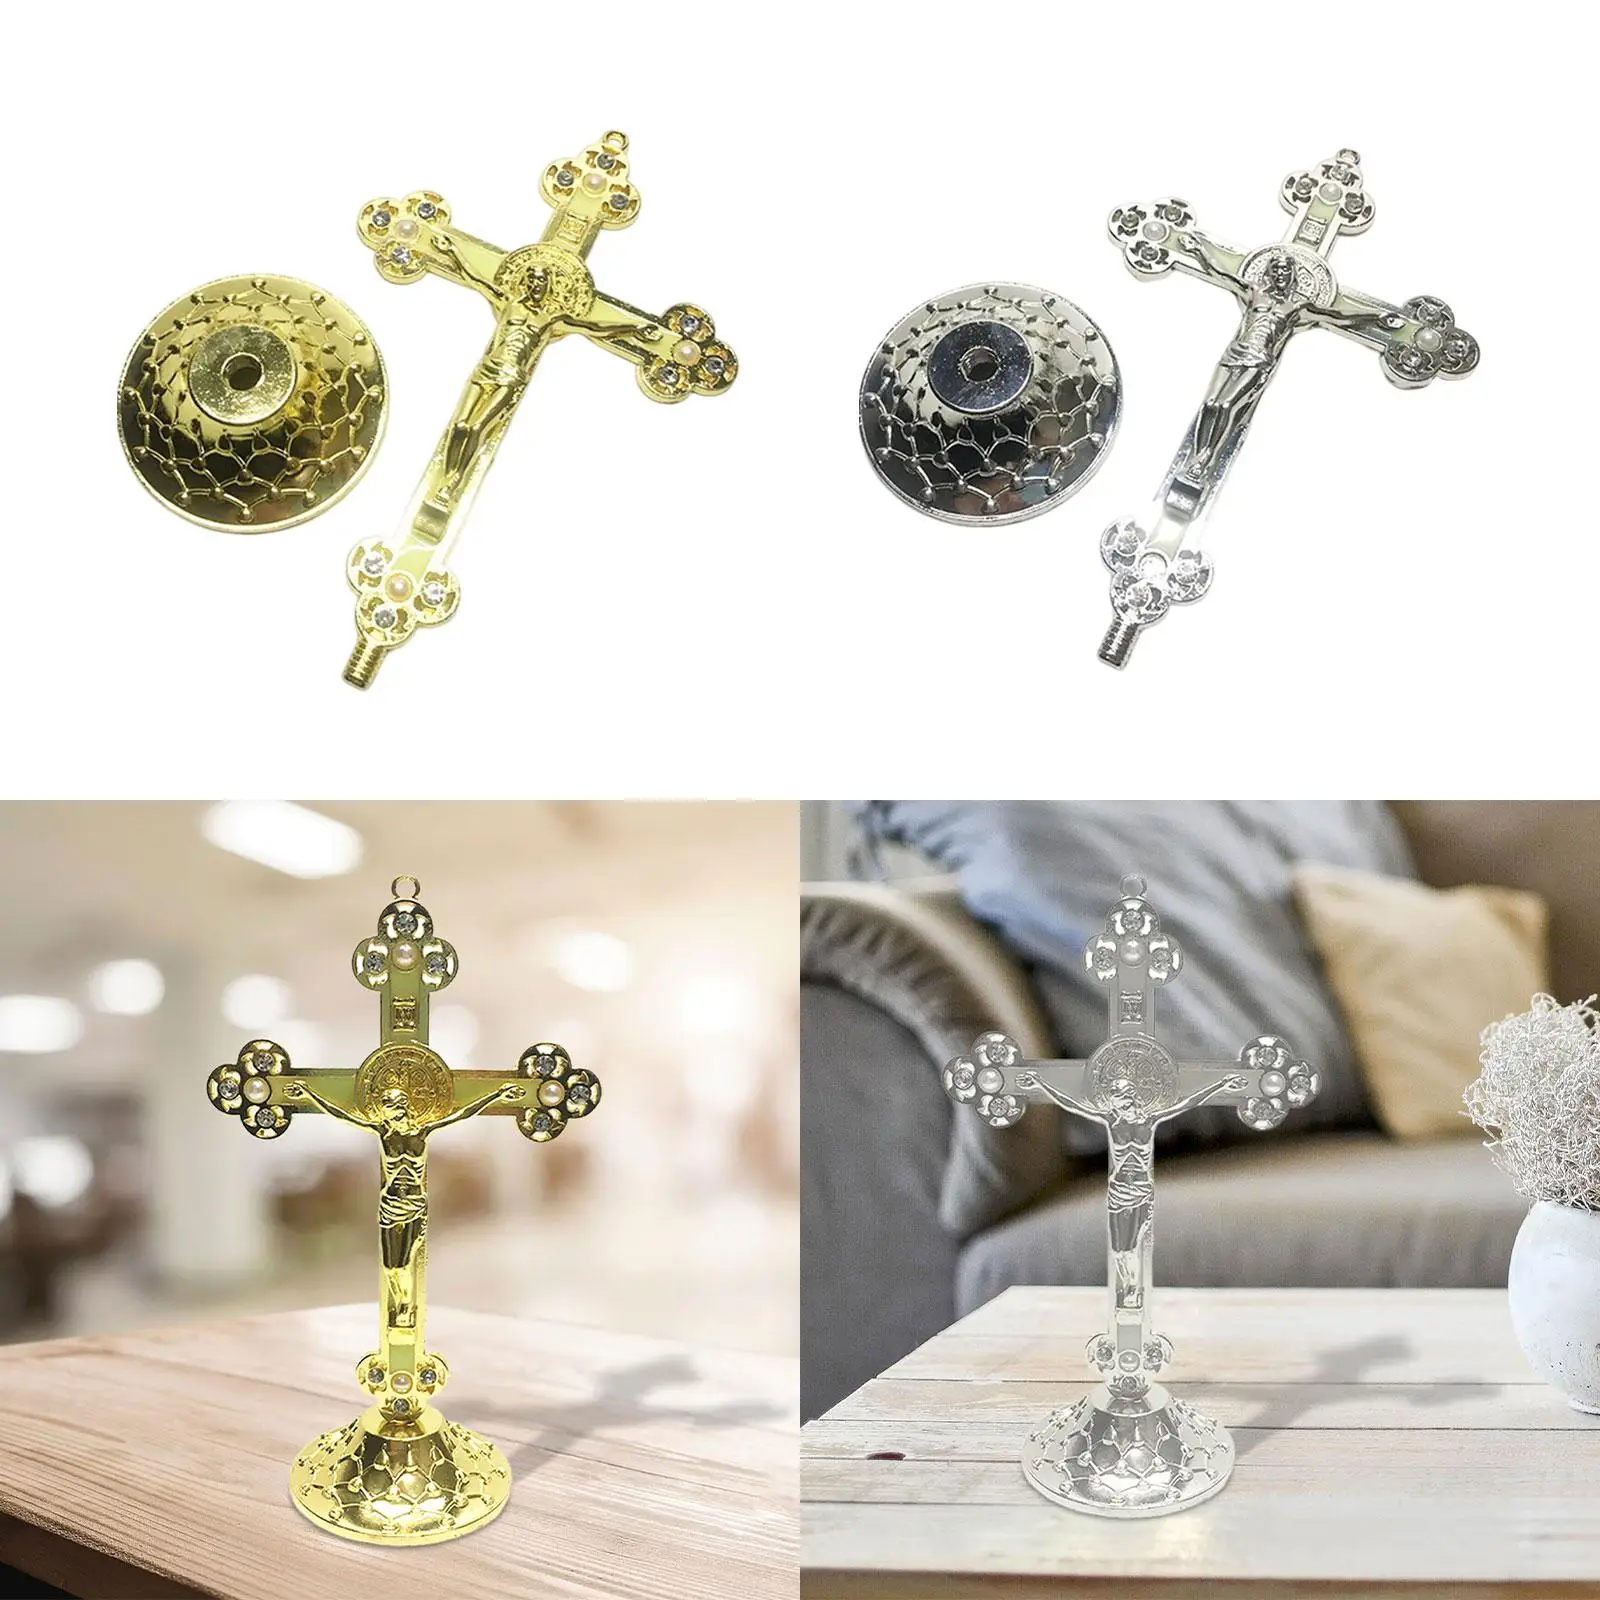 Crucifix Figurine Figurine Table Decoration Religious Ornament Crucifix Wall Cross for Shelf Thanksgiving Home Easter Home Decor